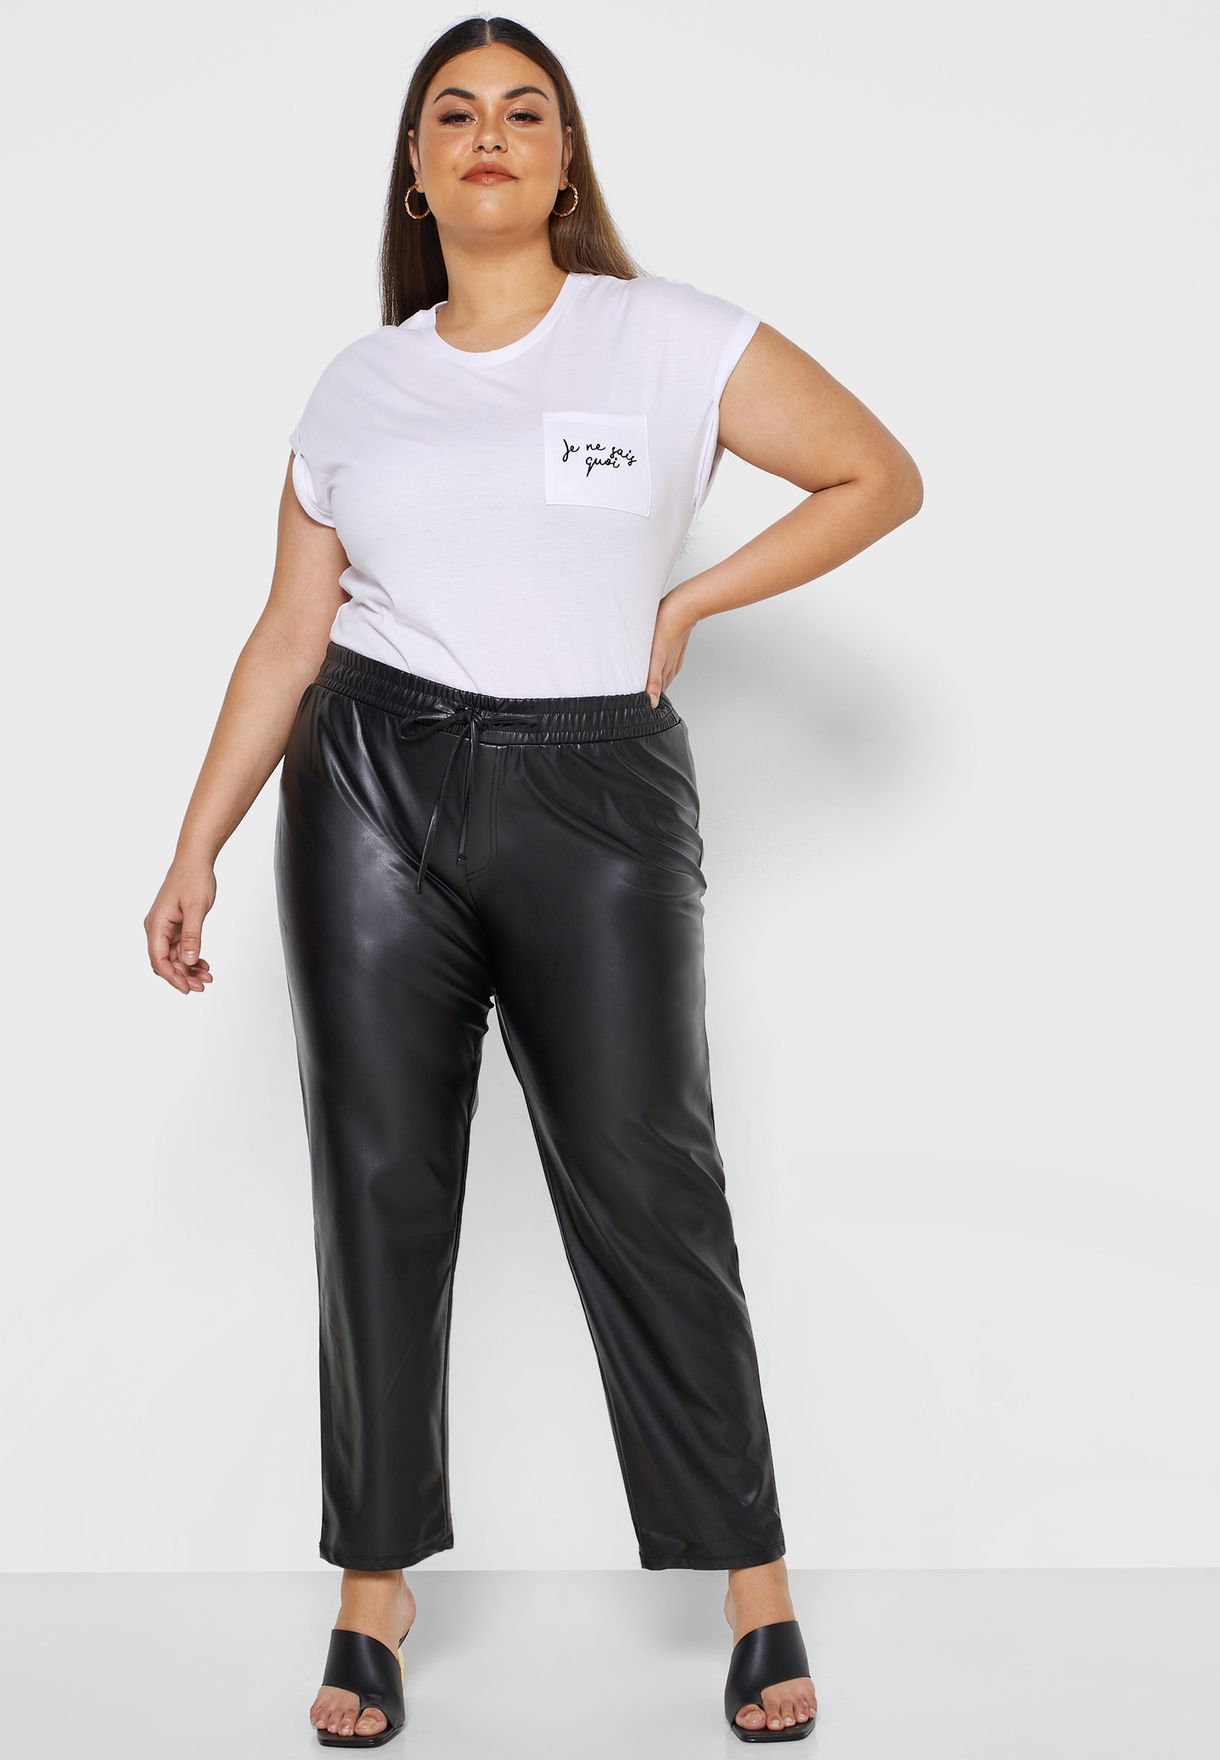 dorothy perkins leather pants